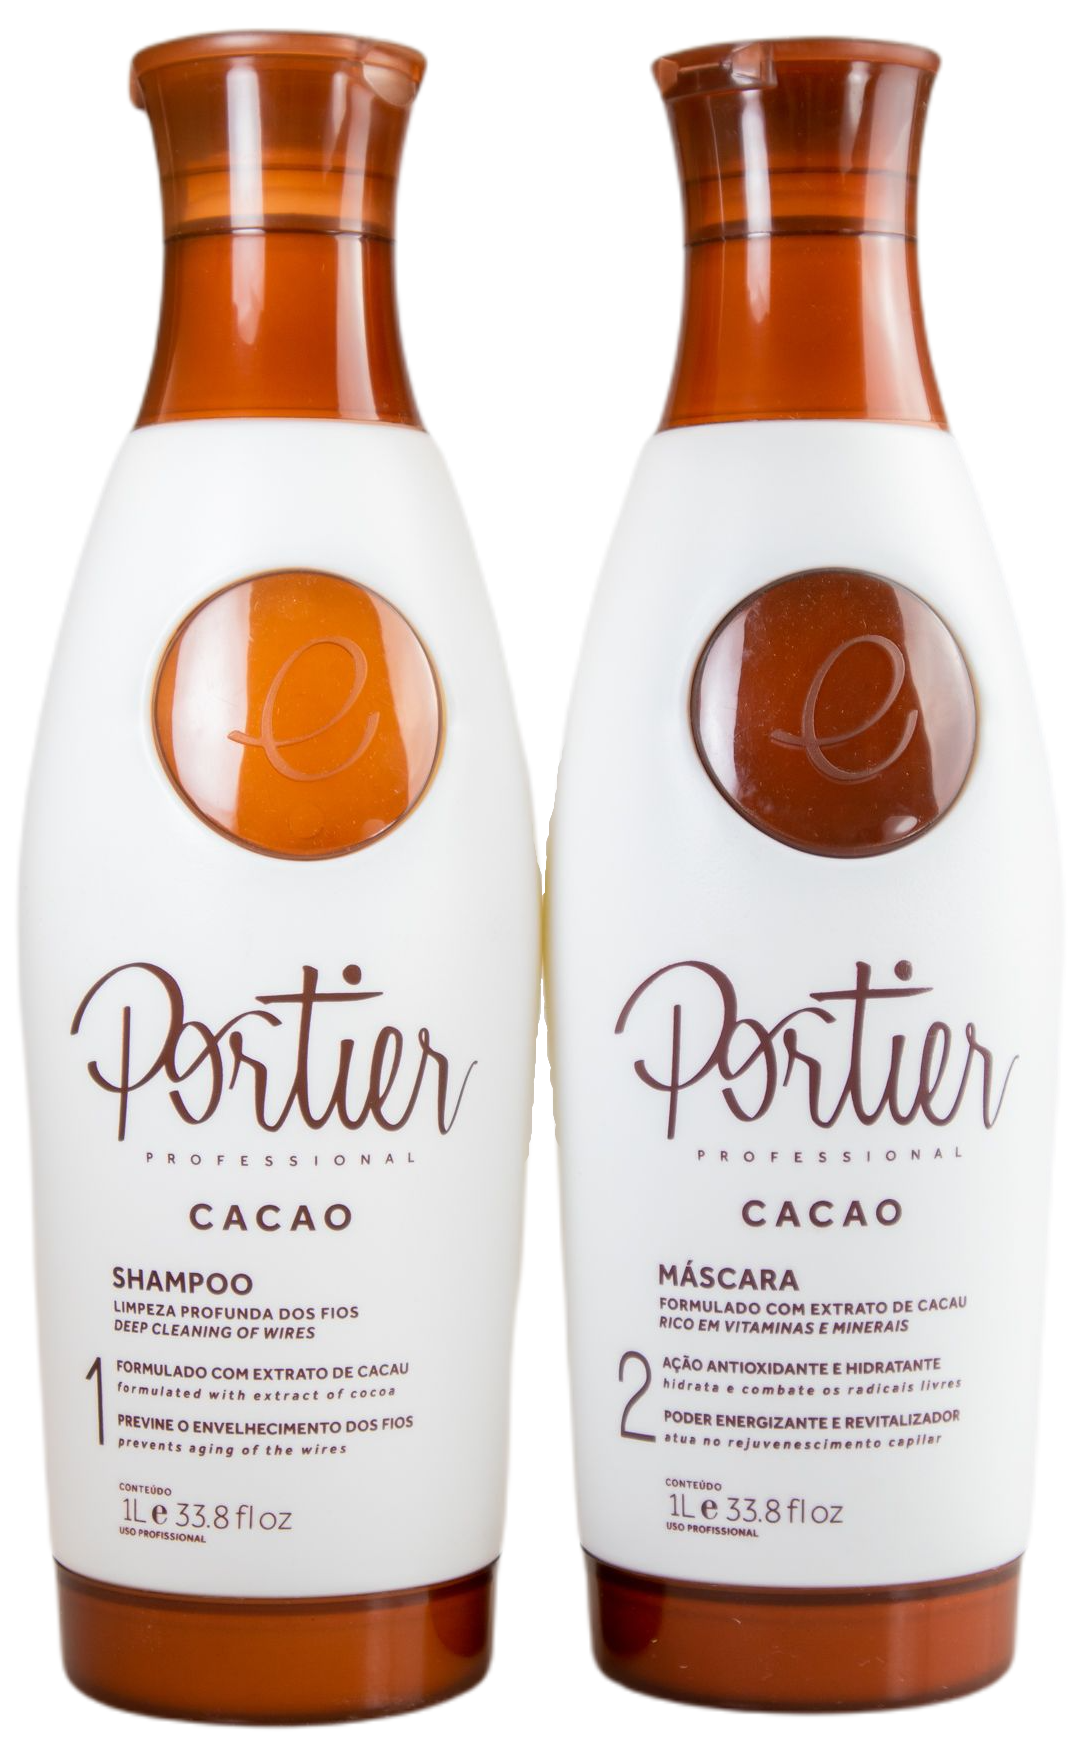 Portier Brazilian Keratin Treatment Portier Cacao Thermo Smoothing Anti Aging Kit 2x1l - Portier